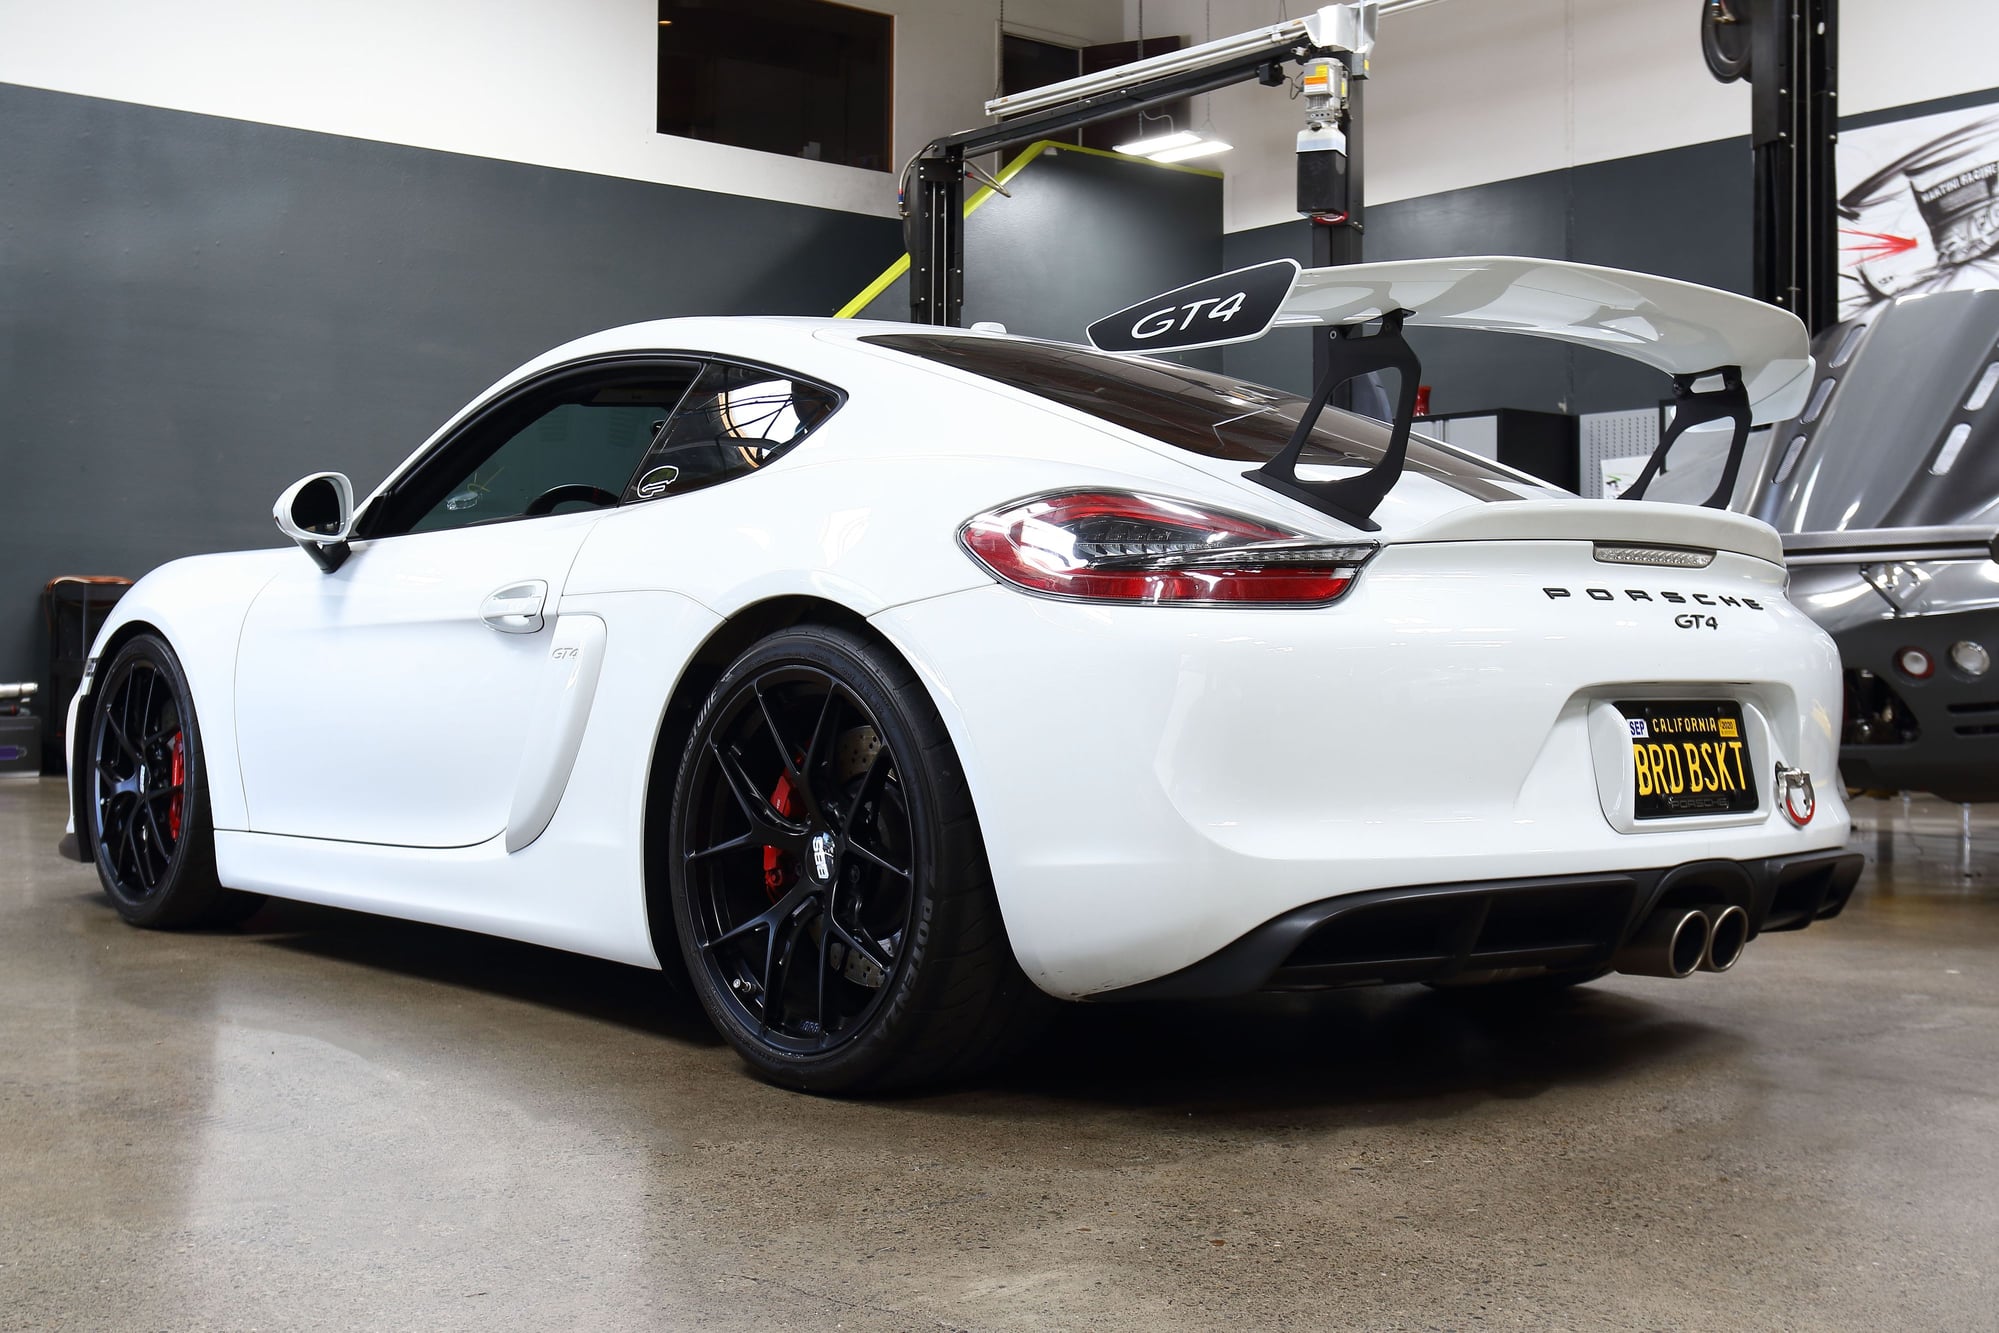 2016 Porsche Cayman GT4 - Updated: Track-Ready 981 GT4 CPO with Goodies - Used - VIN WP0AC2A83GK197580 - 27,000 Miles - 6 cyl - 2WD - Manual - Coupe - White - Fontana, CA 92336, United States